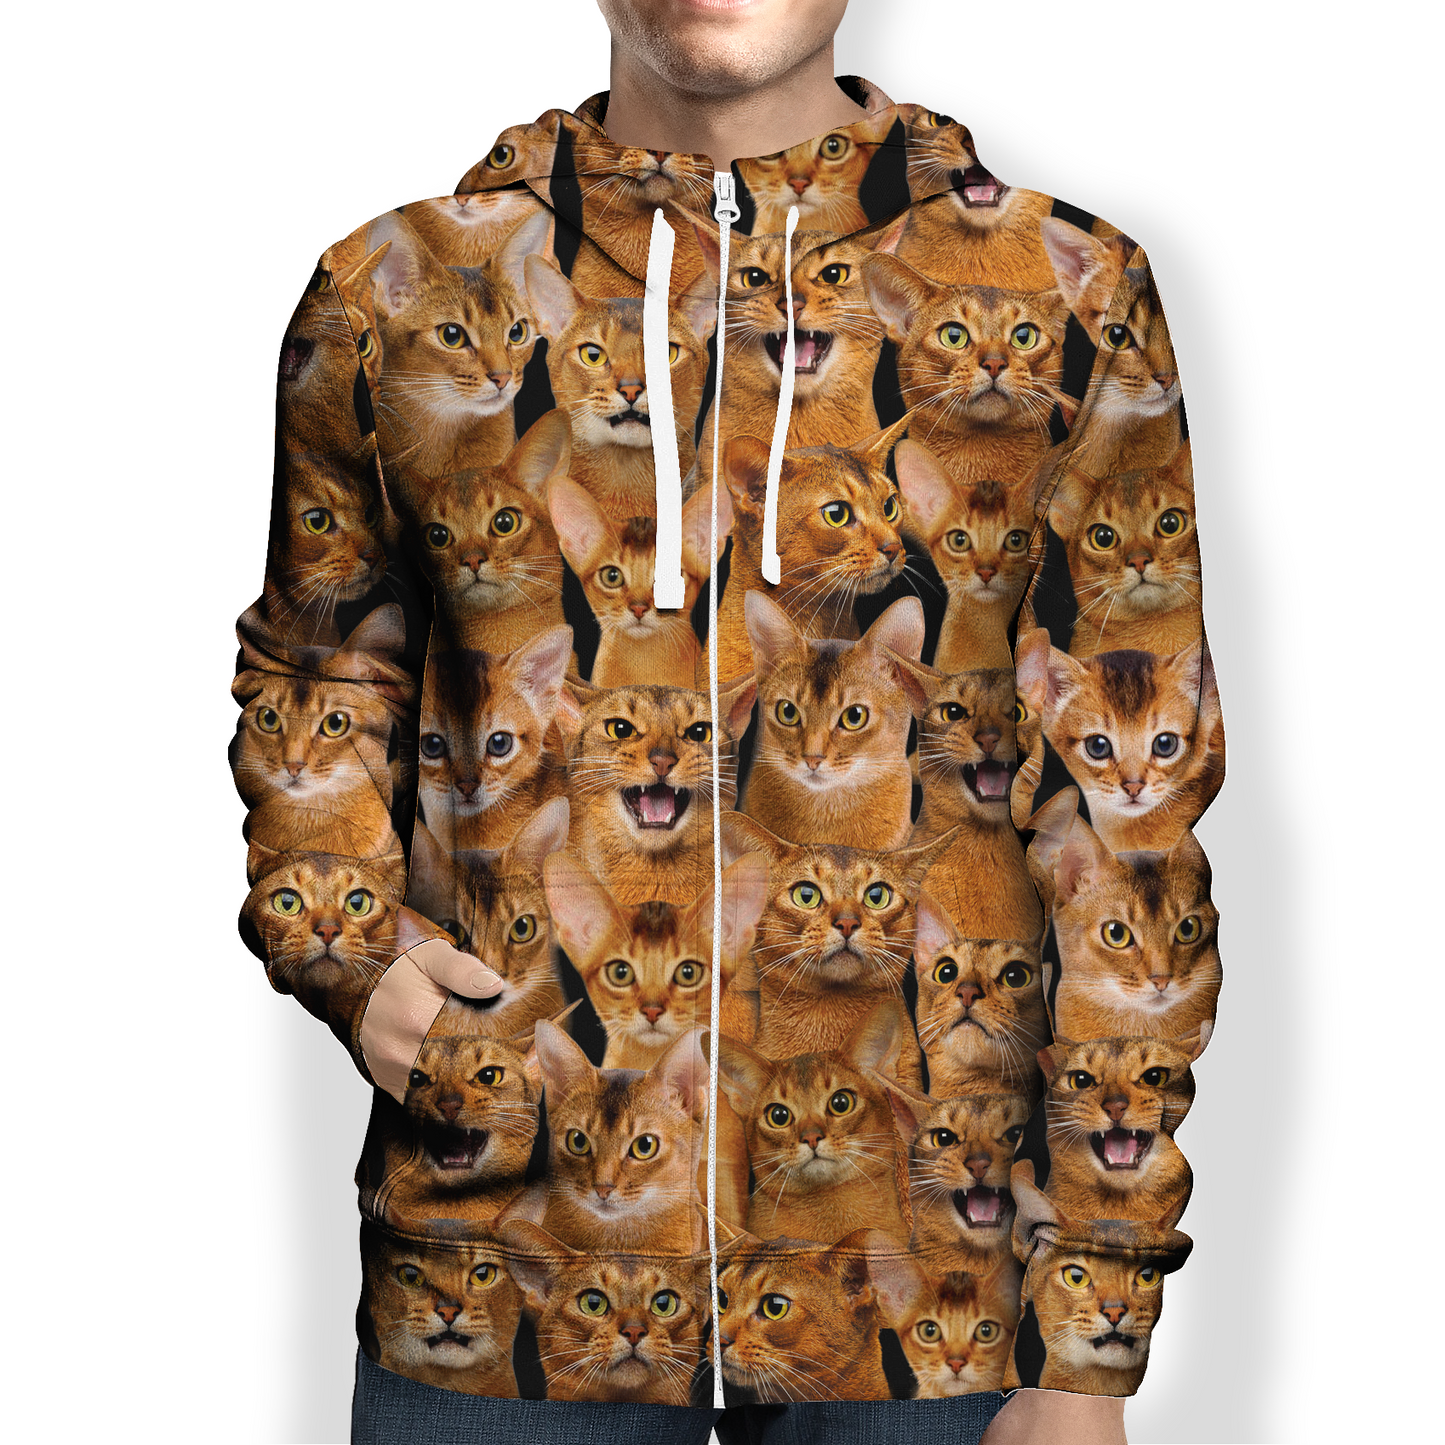 You Will Have A Bunch Of Abyssinian Cats - Hoodie V1